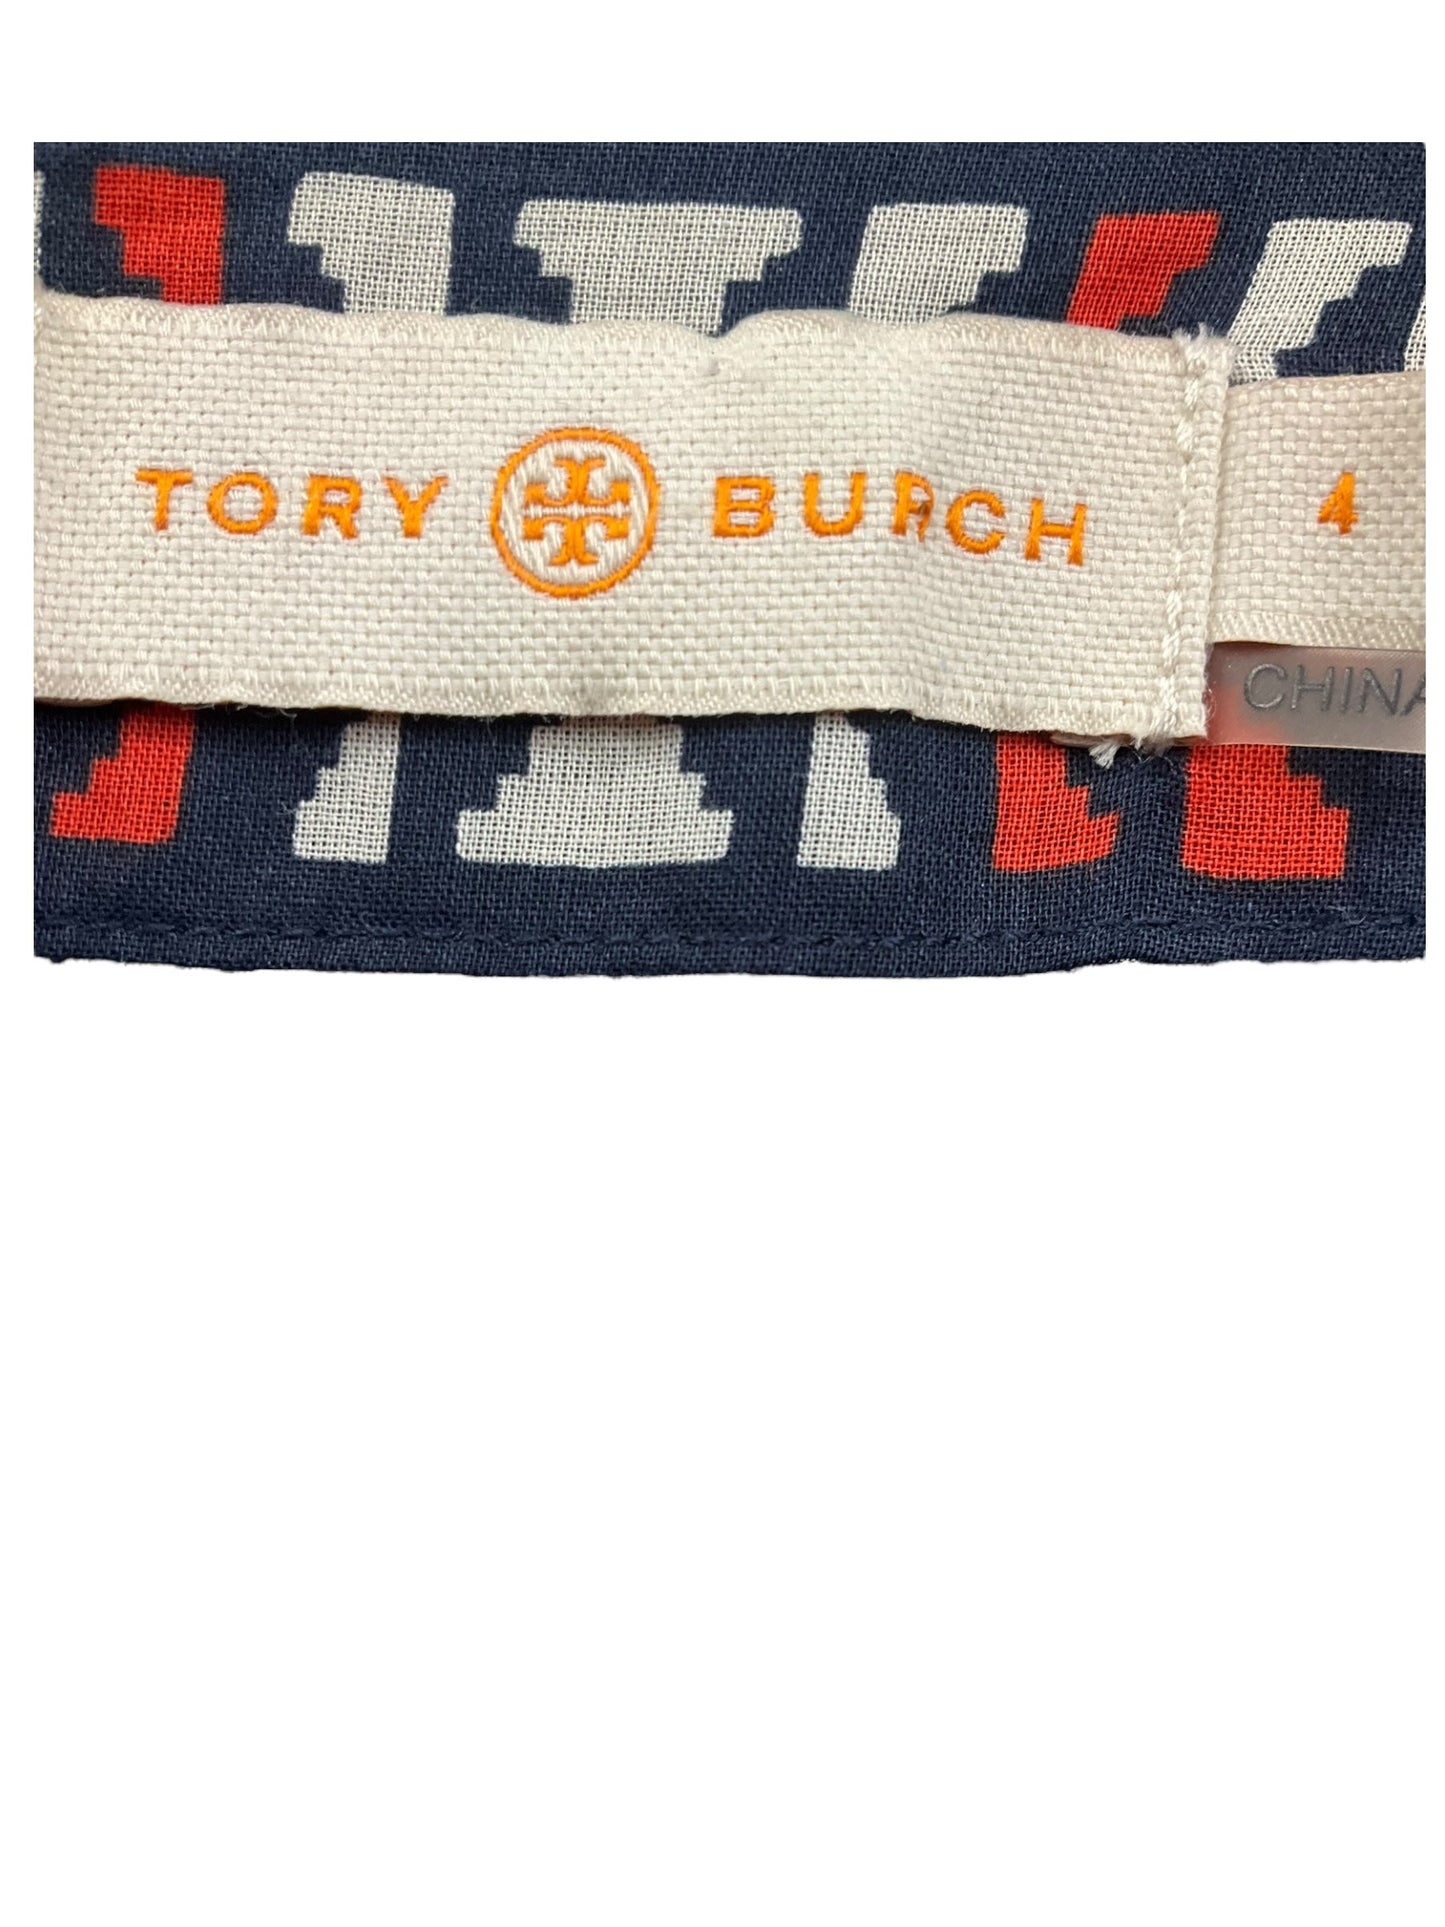 Tunic Long Sleeve By Tory Burch  Size: S